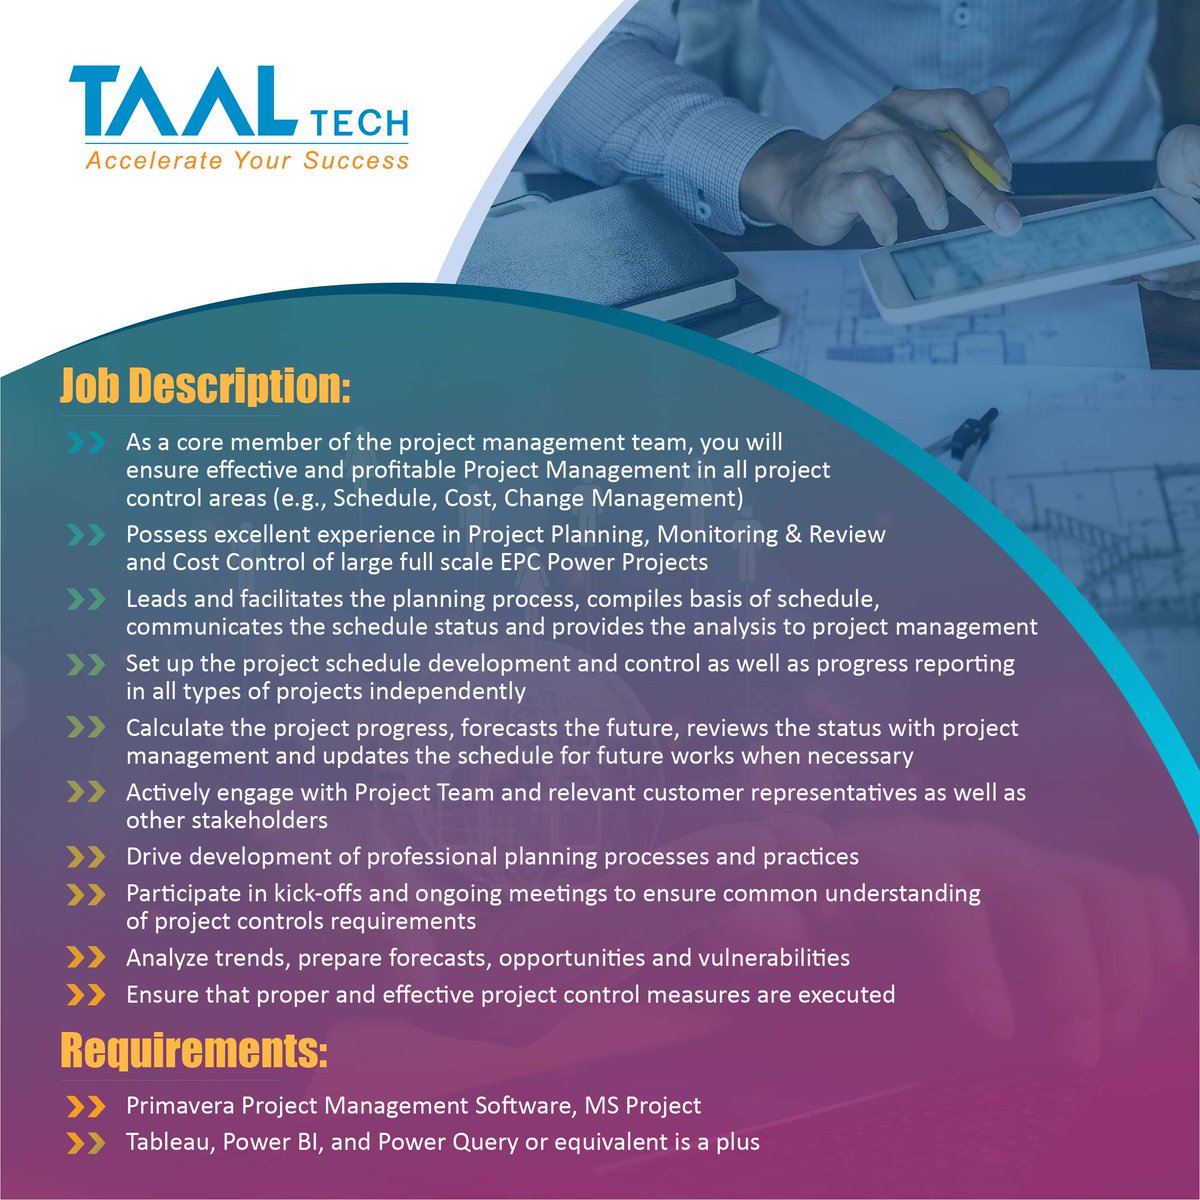 We are hiring for #projectplanner for our #oilandgas project. 
Interested professionals can share resumes to: abhishek_venkatesh@taaltech.com

#projectplanner #projectmanagement #changemanagement #epcprojects #primavera #msproject #tableau #powerbi #powerquery #projectcontrols